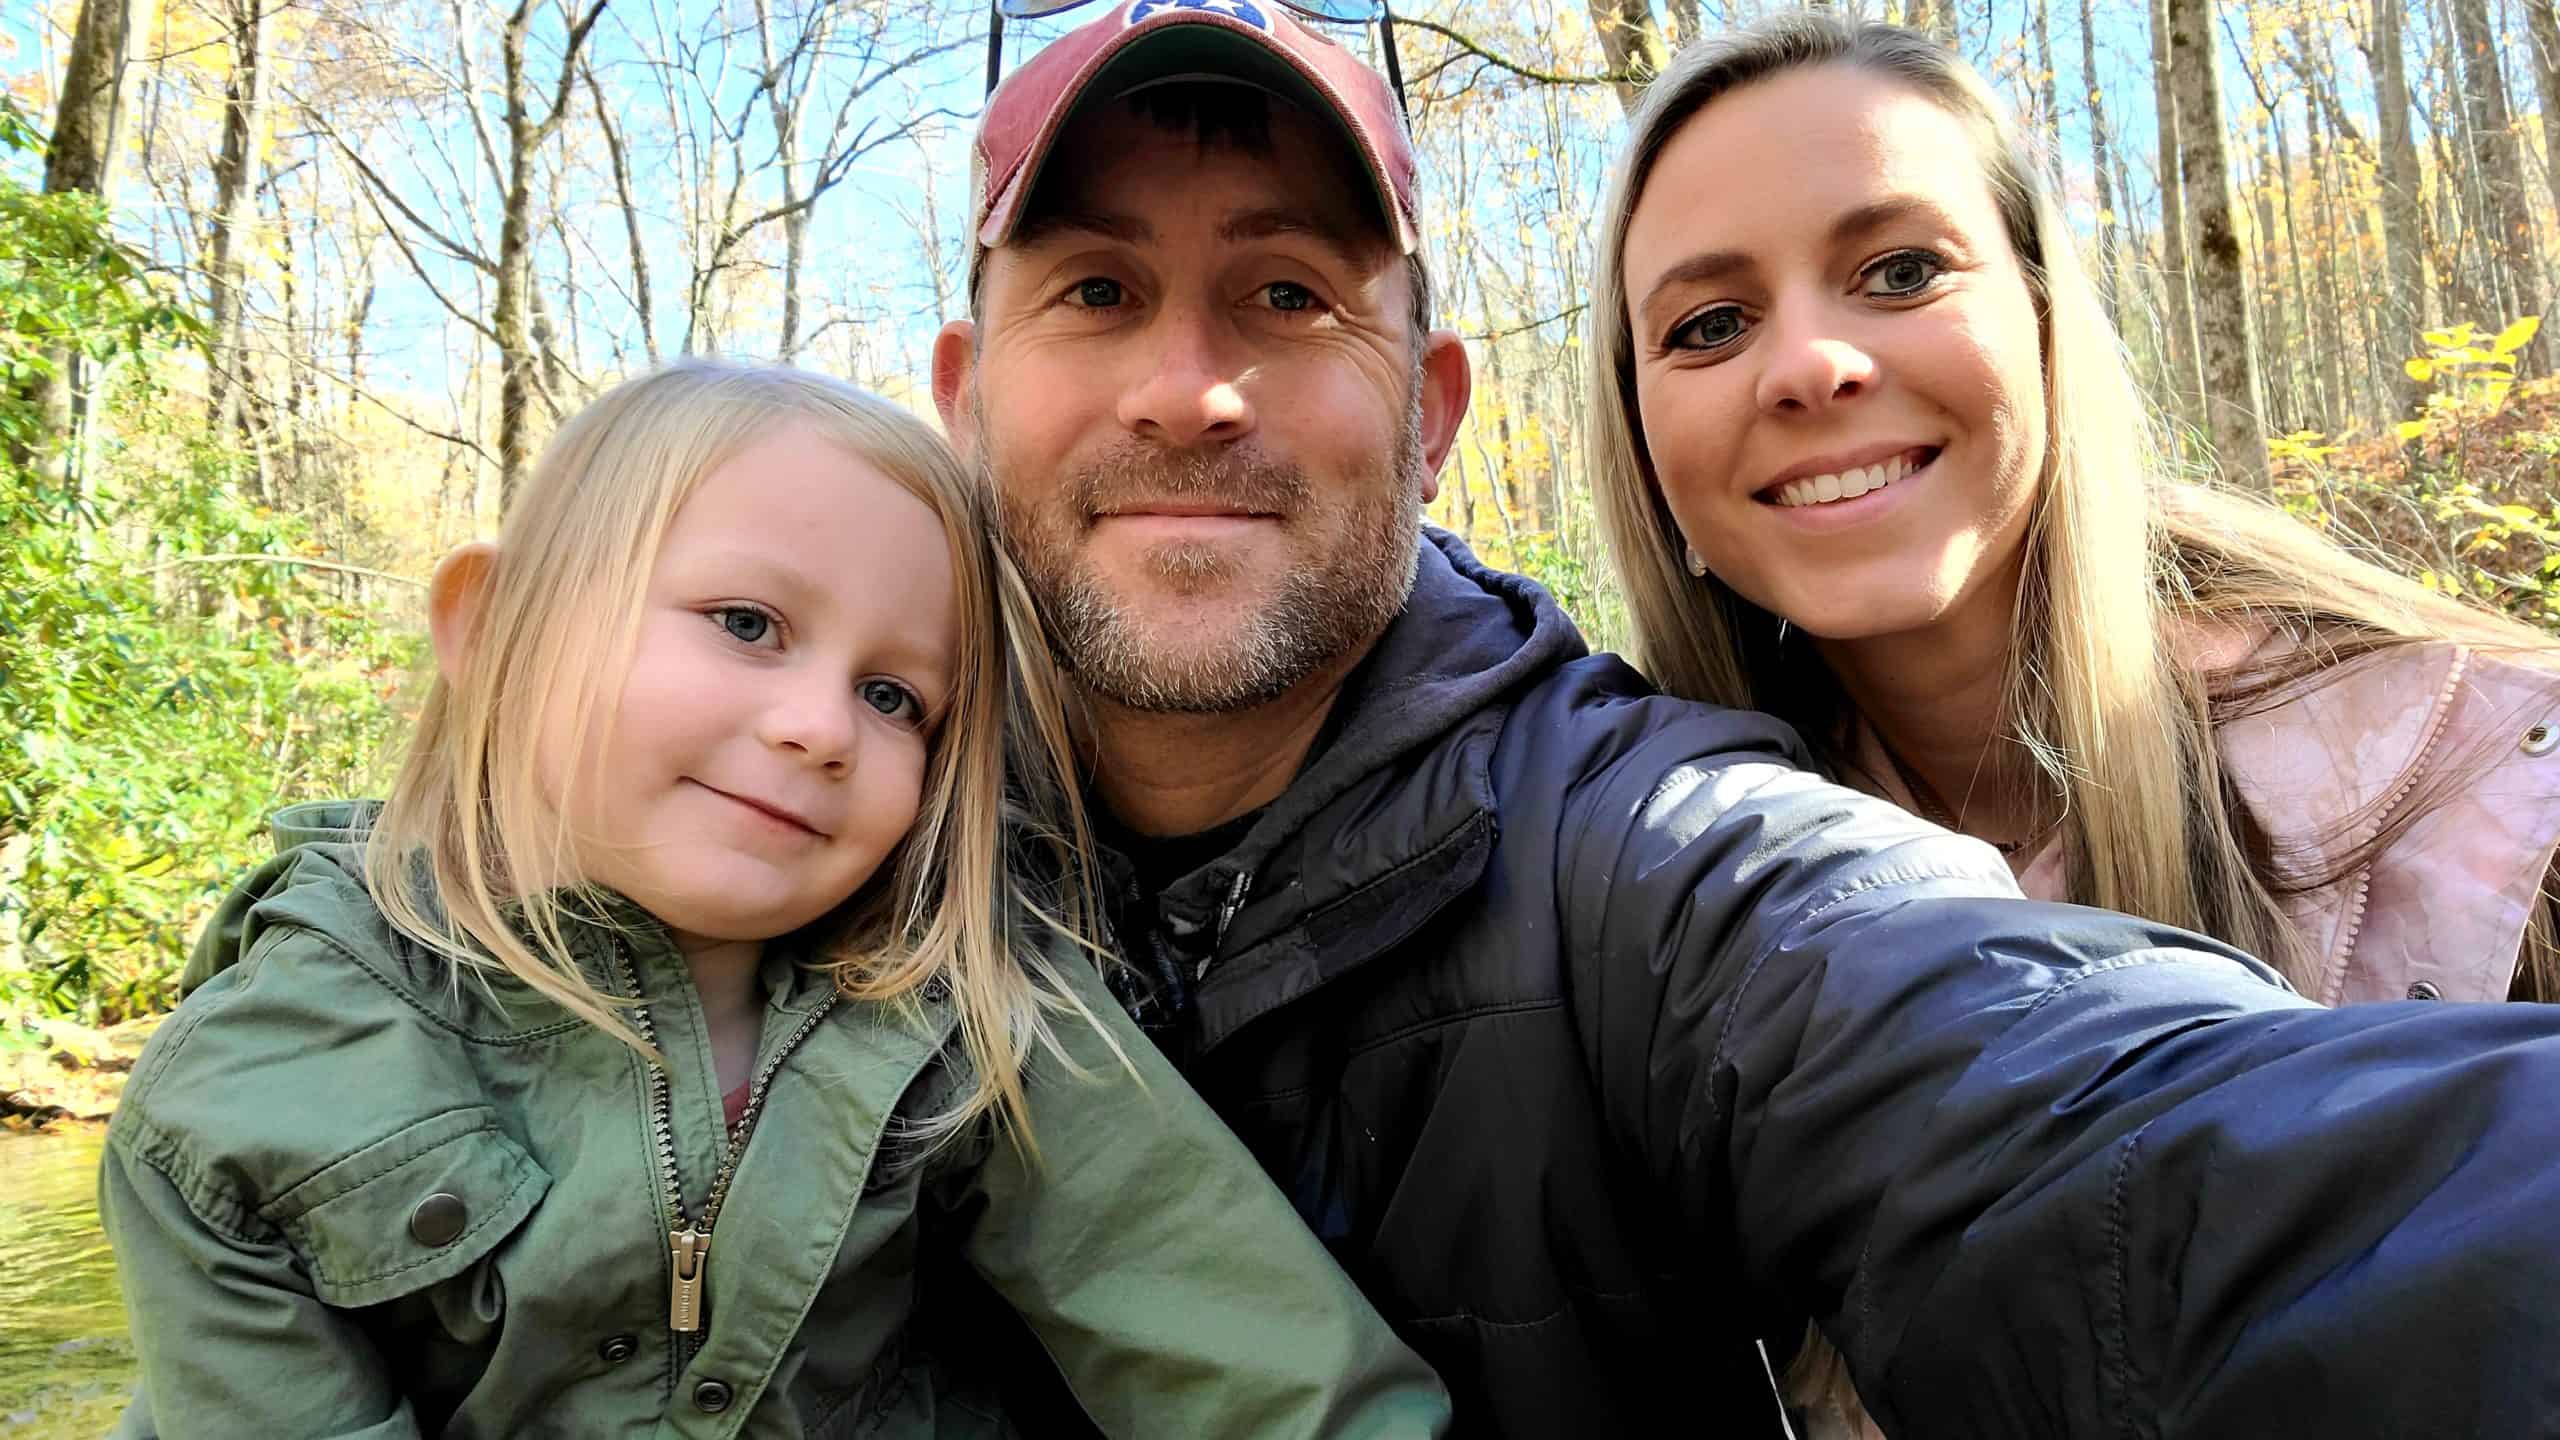 Justin Patrick with his daughter and wife